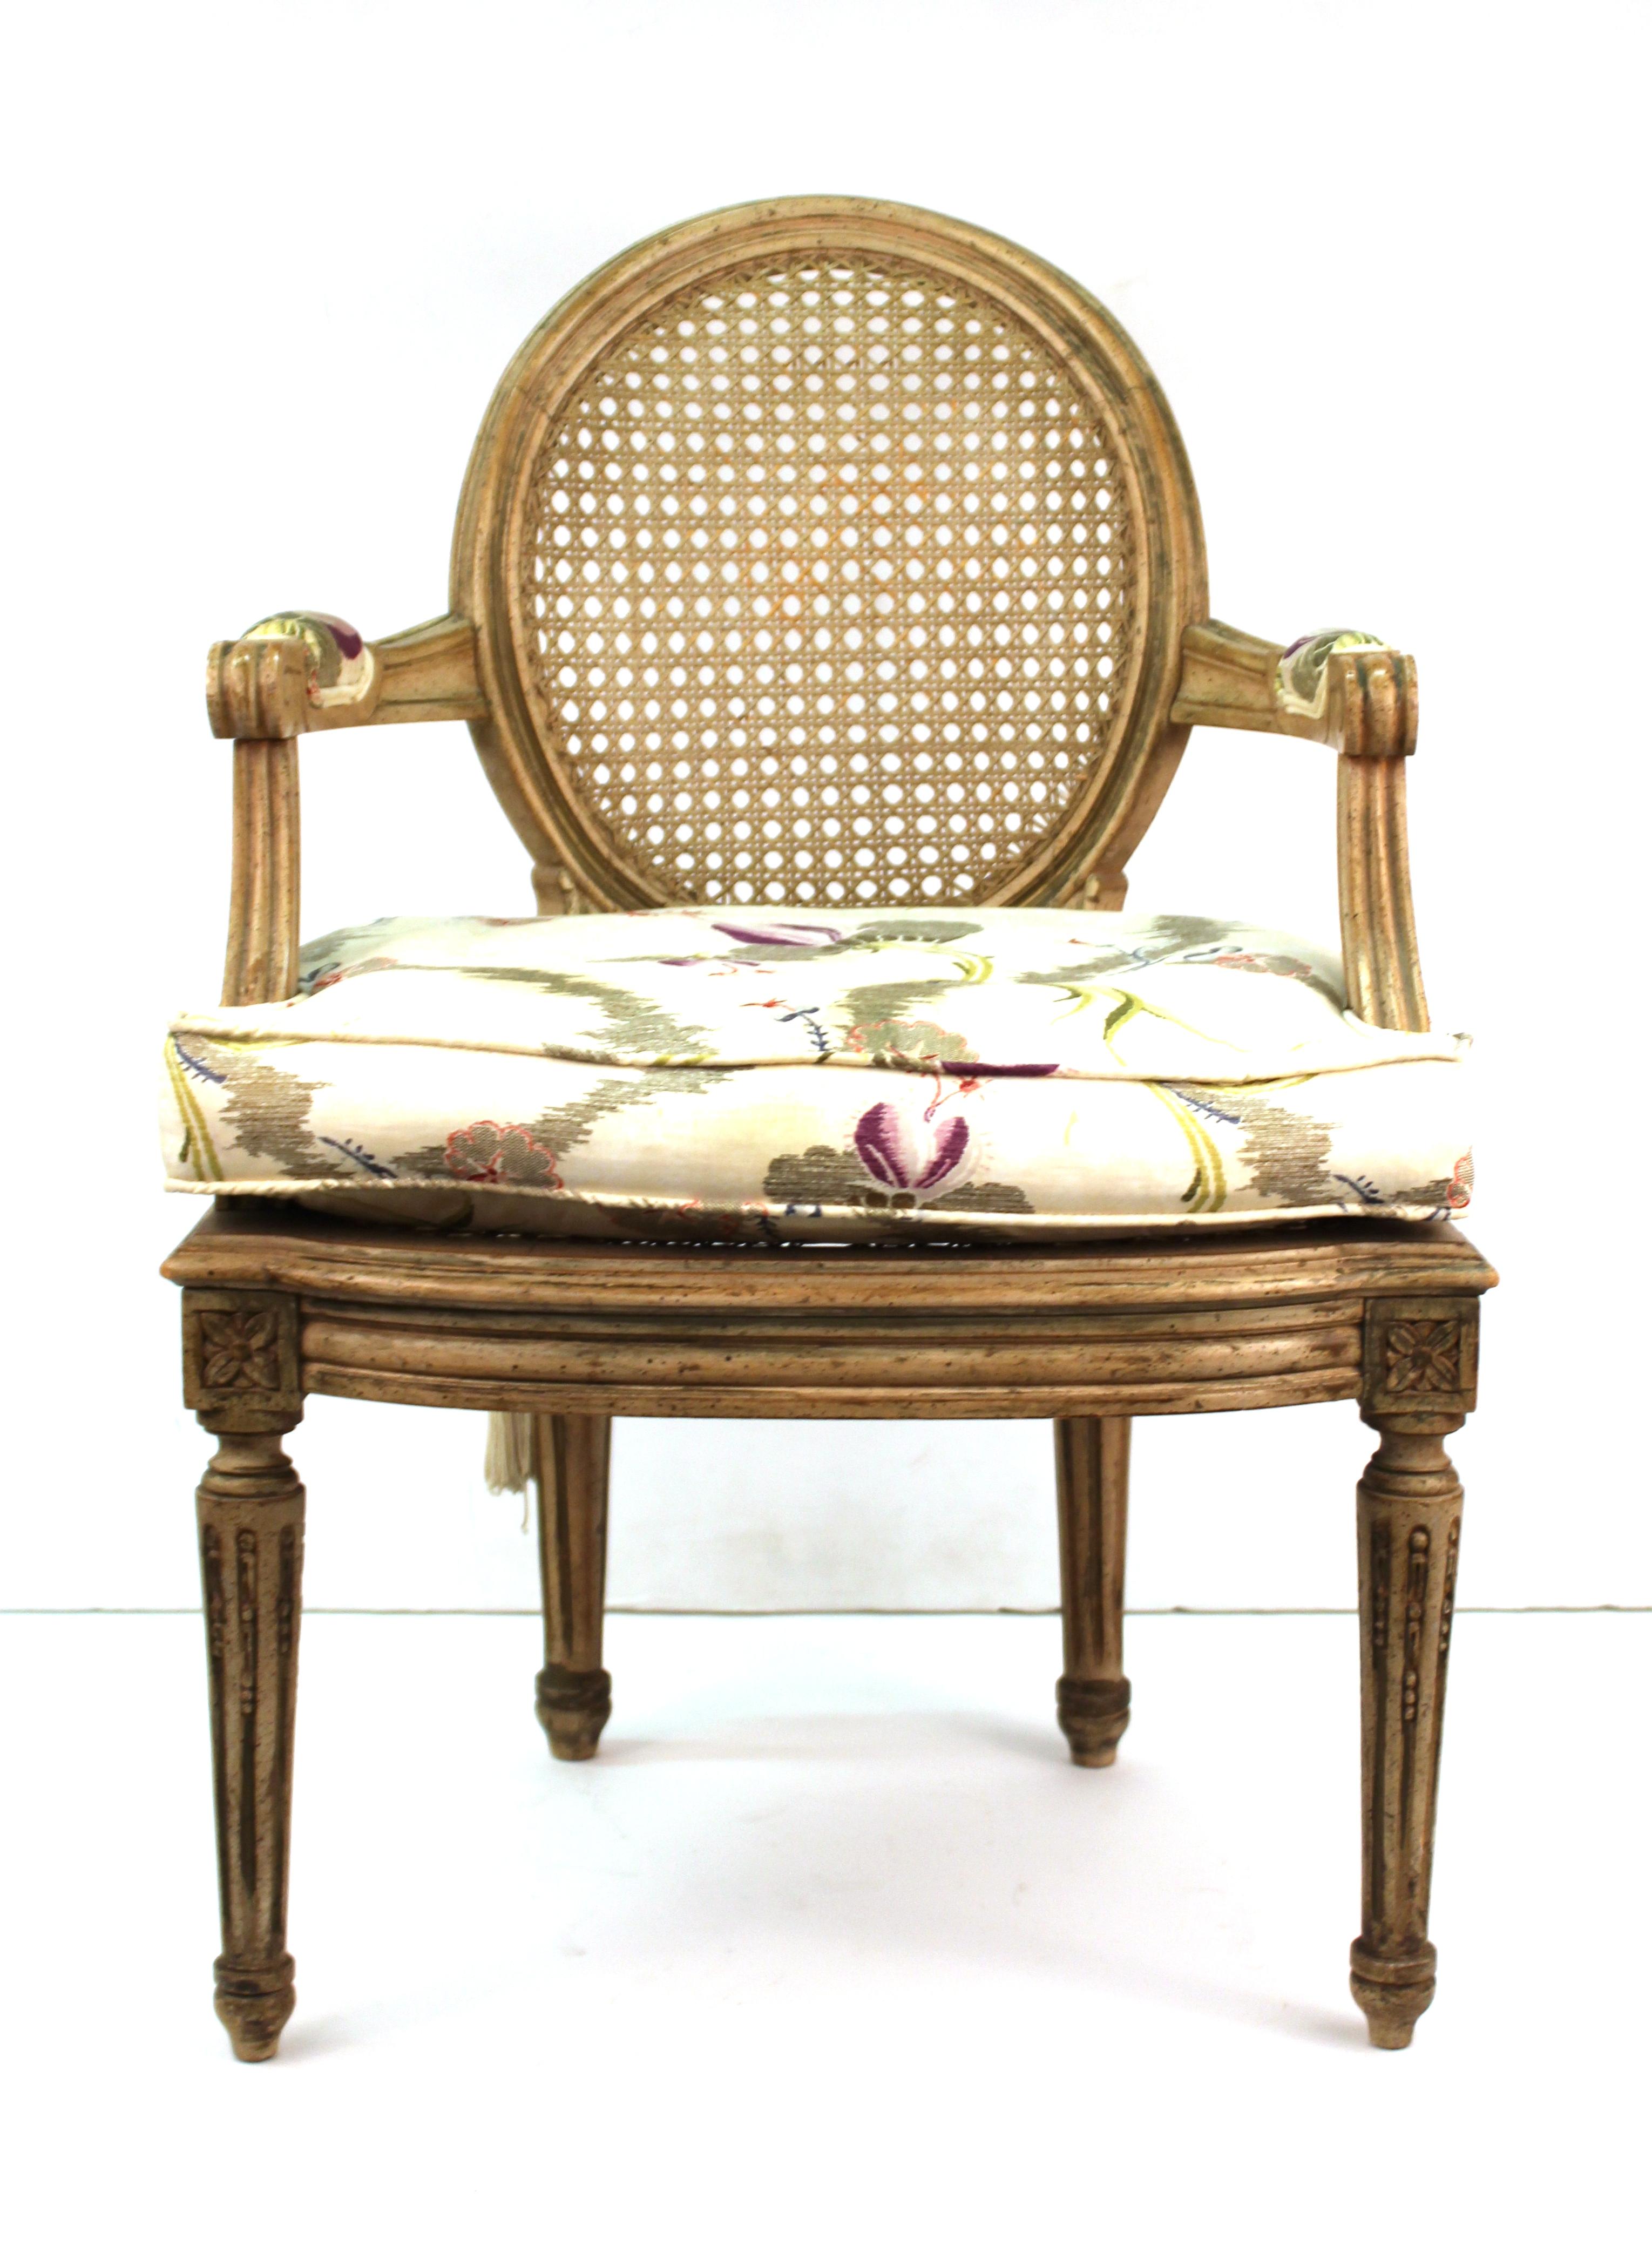 Louis XVI style diminutive armchair with caned back and seat. The piece comes with an upholstered cushion and is ideally sized for children or dolls. In great vintage condition with age-appropriate wear and use.